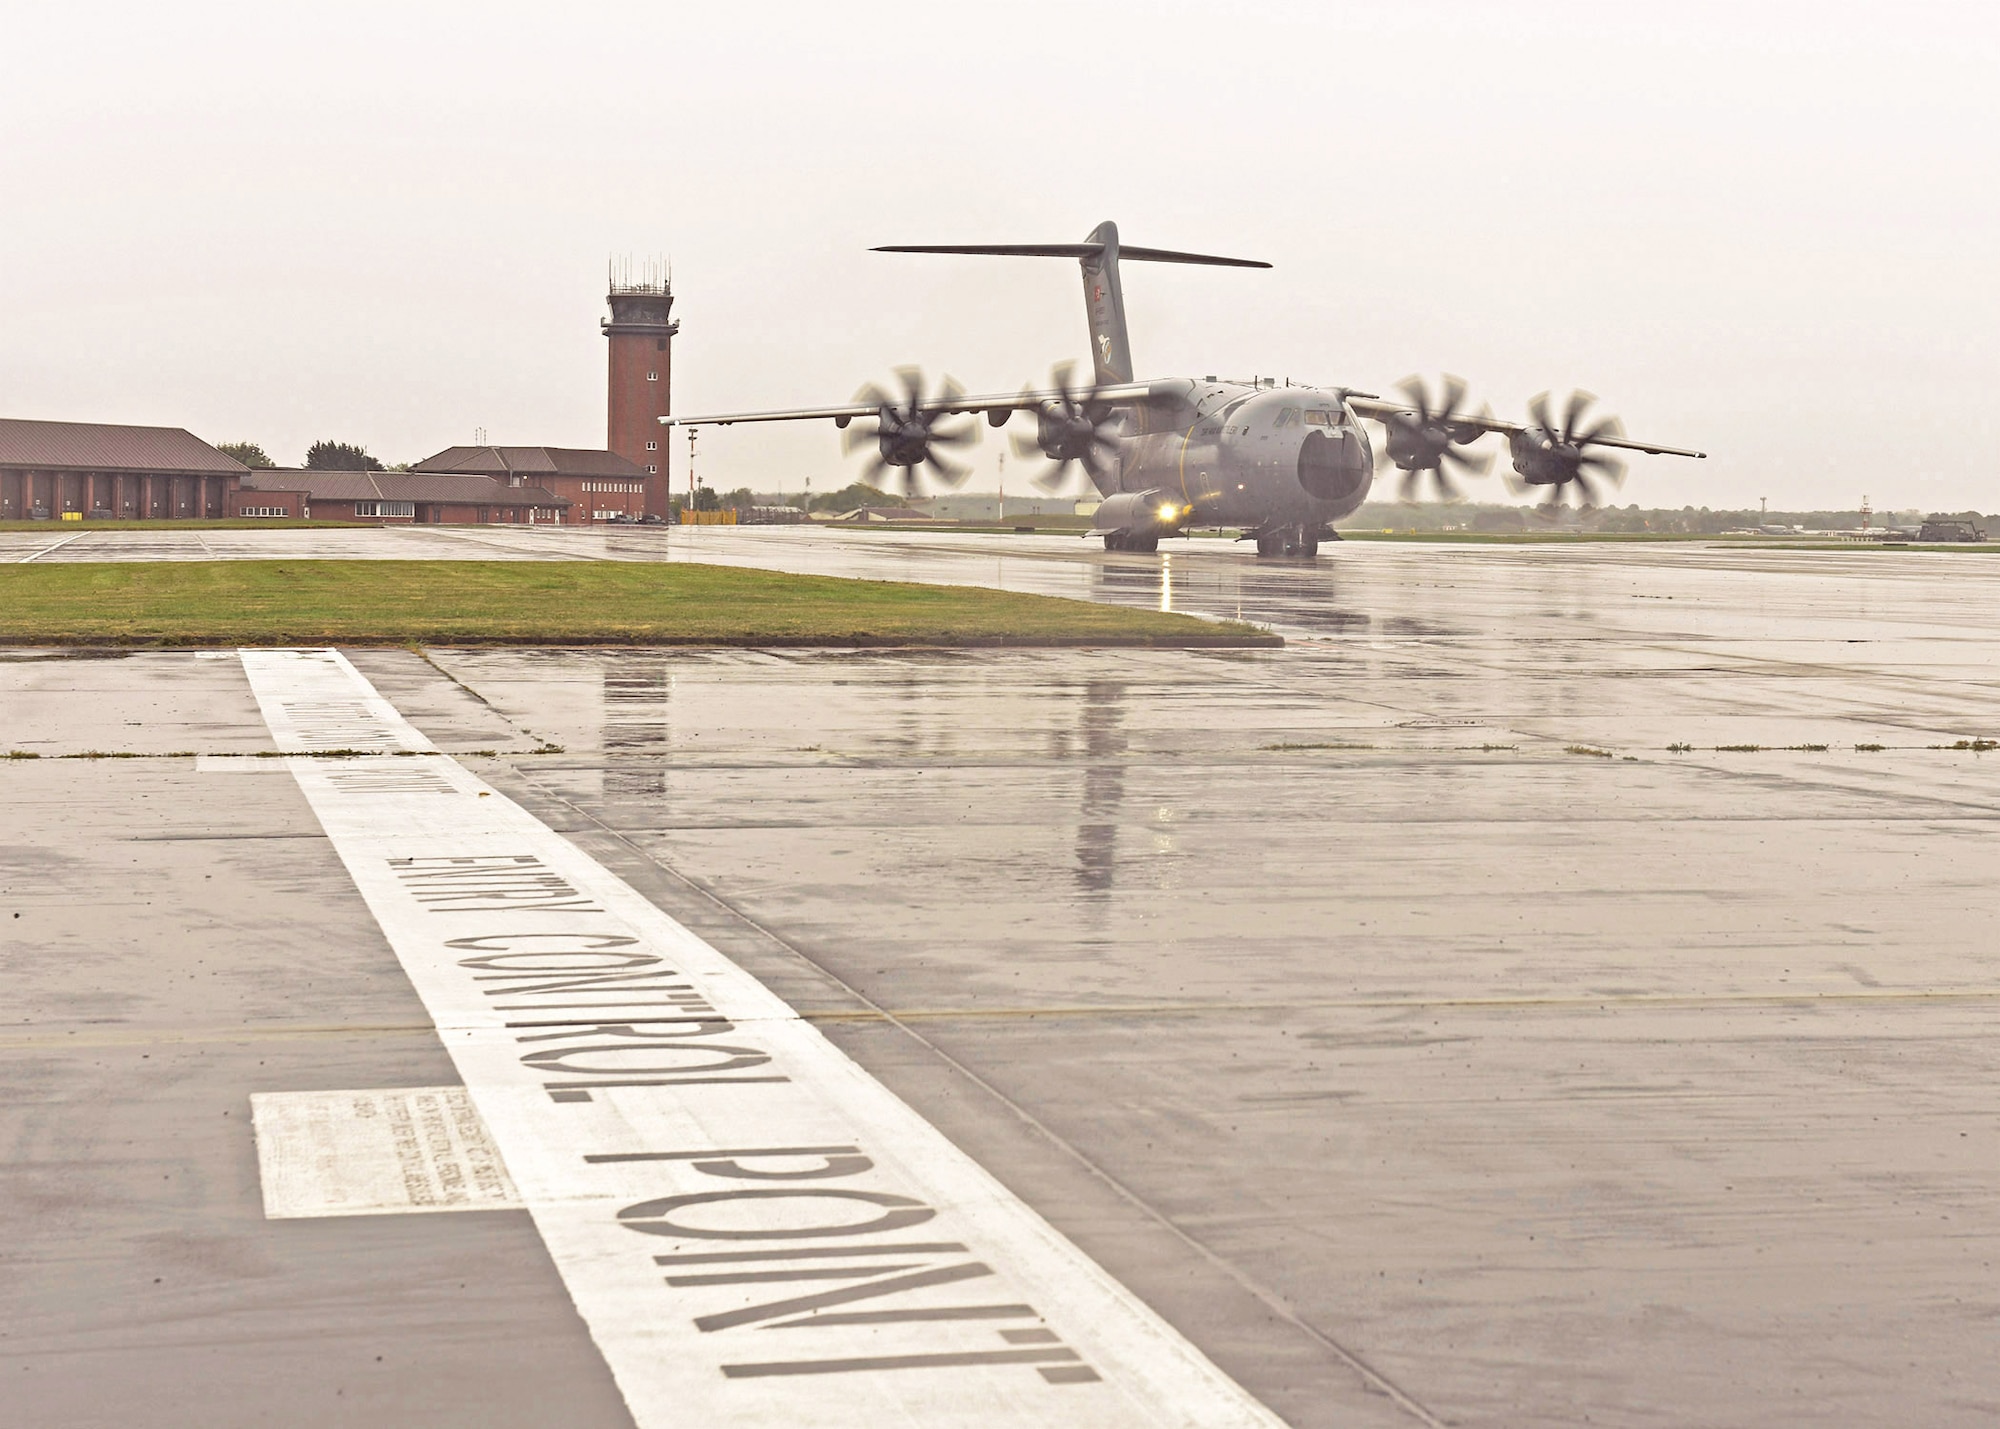 A Turkish Airbus A400M Atlas taxies upon arrival at RAF Mildenhall, England, April 28, 2020, before continuing on to Joint Base Andrews, Md., to deliver COVID-19 medical supplies. Airmen from RAF Mildenhall were ready and waiting to assist the crew and refuel the aircraft, demonstrating our mutual support of NATO allies during this difficult time. (U.S. Air Force photo by Karen Abeyasekere)